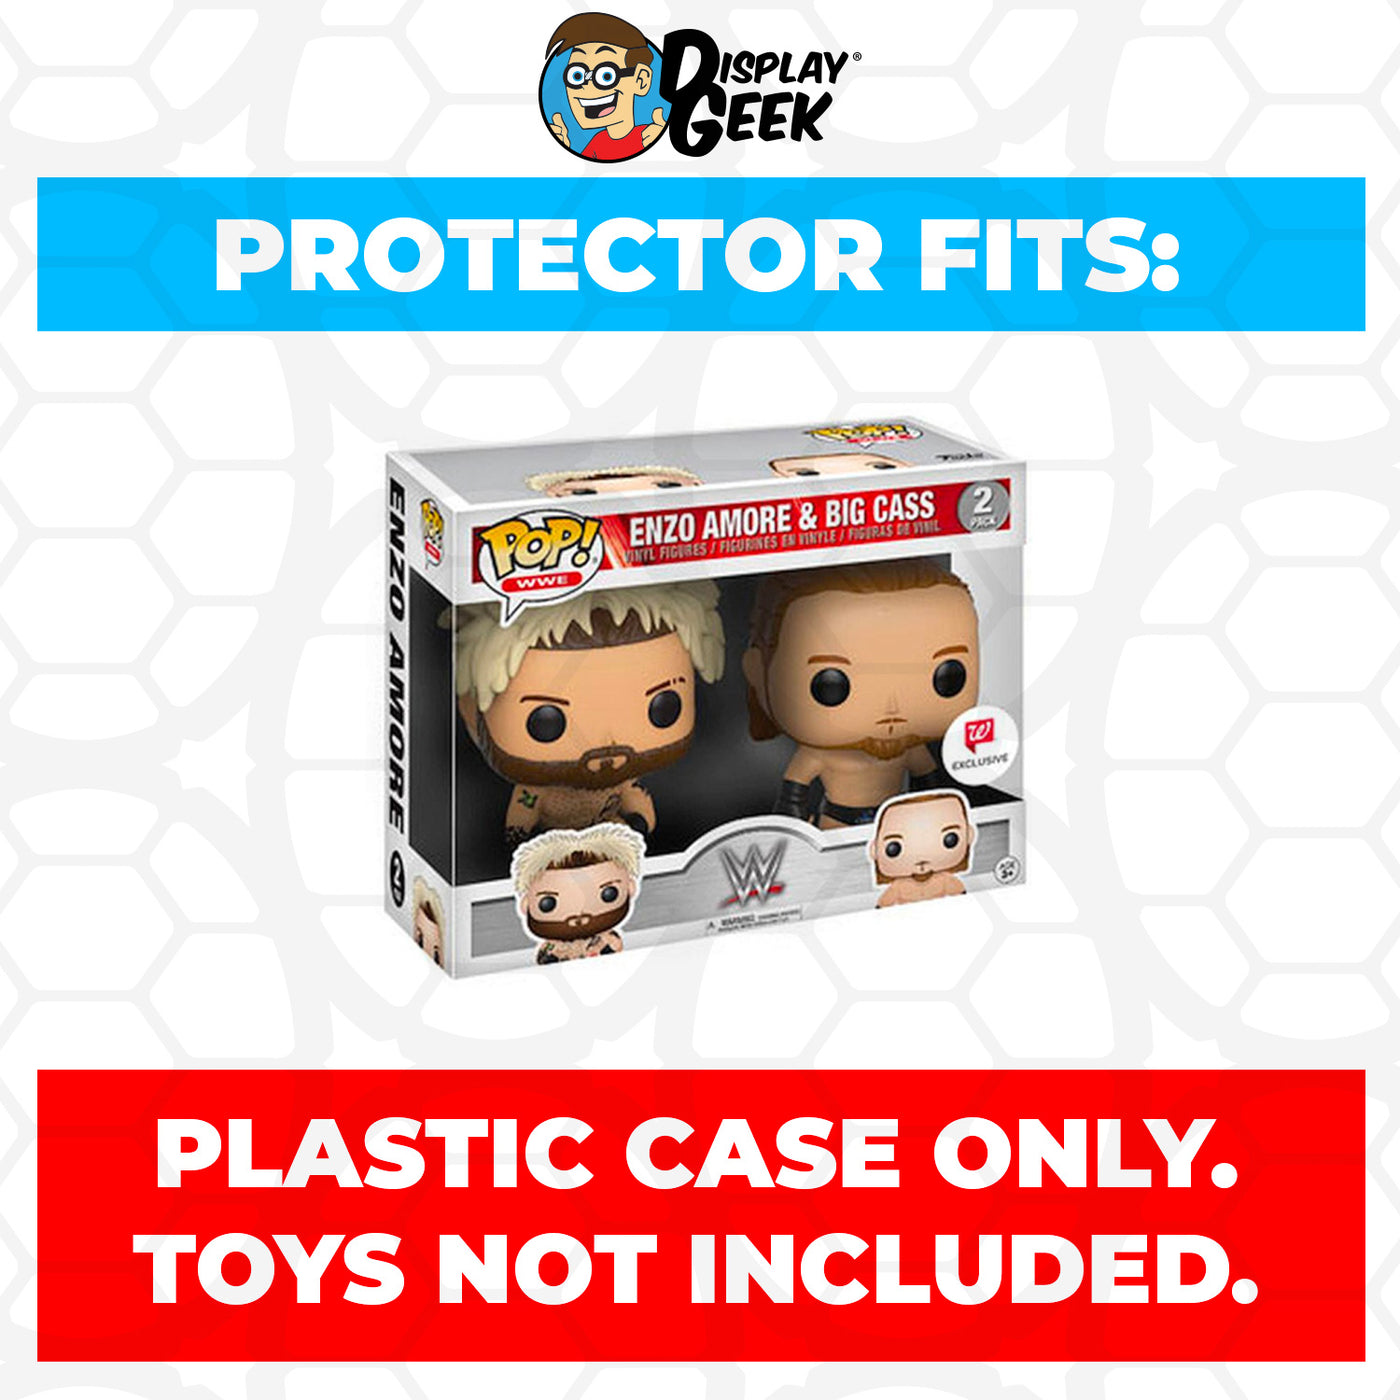 Pop Protector for 2 Pack Enzo Amore & Big Cass Funko Pop on The Protector Guide App by Display Geek